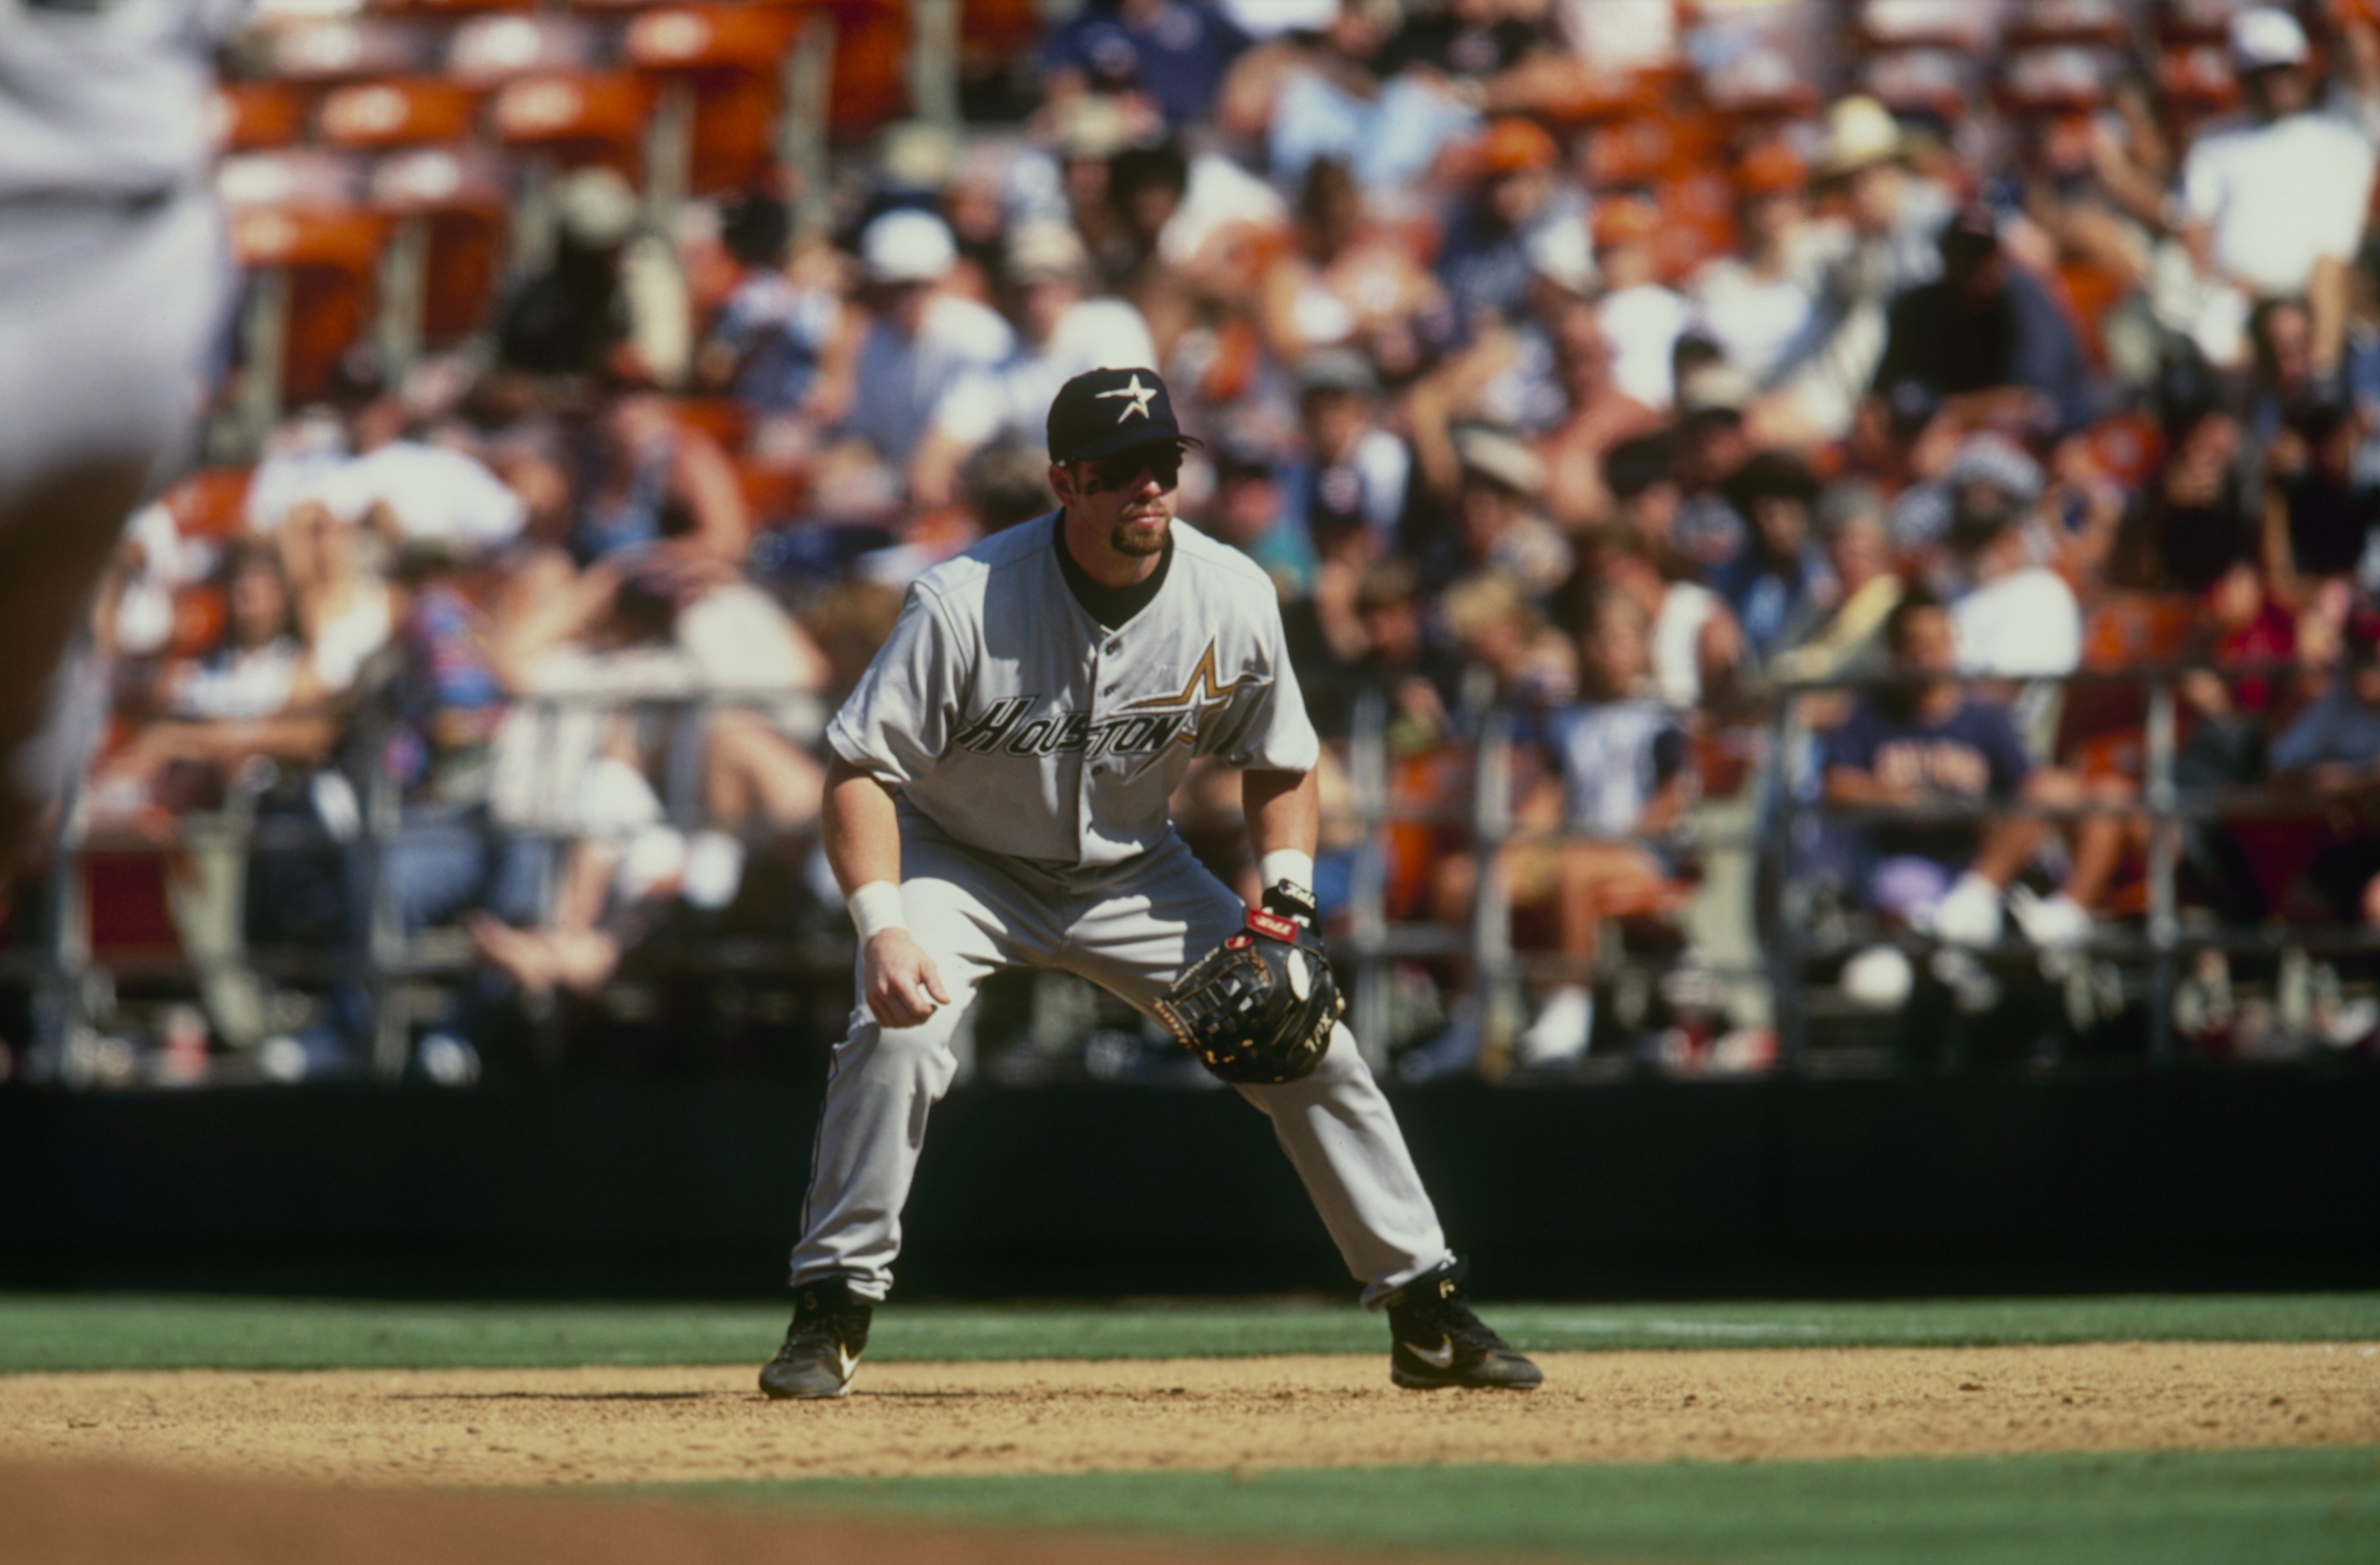 Jeff Bagwell, Tim Raines, Ivan 'Pudge' Rodriguez elected to